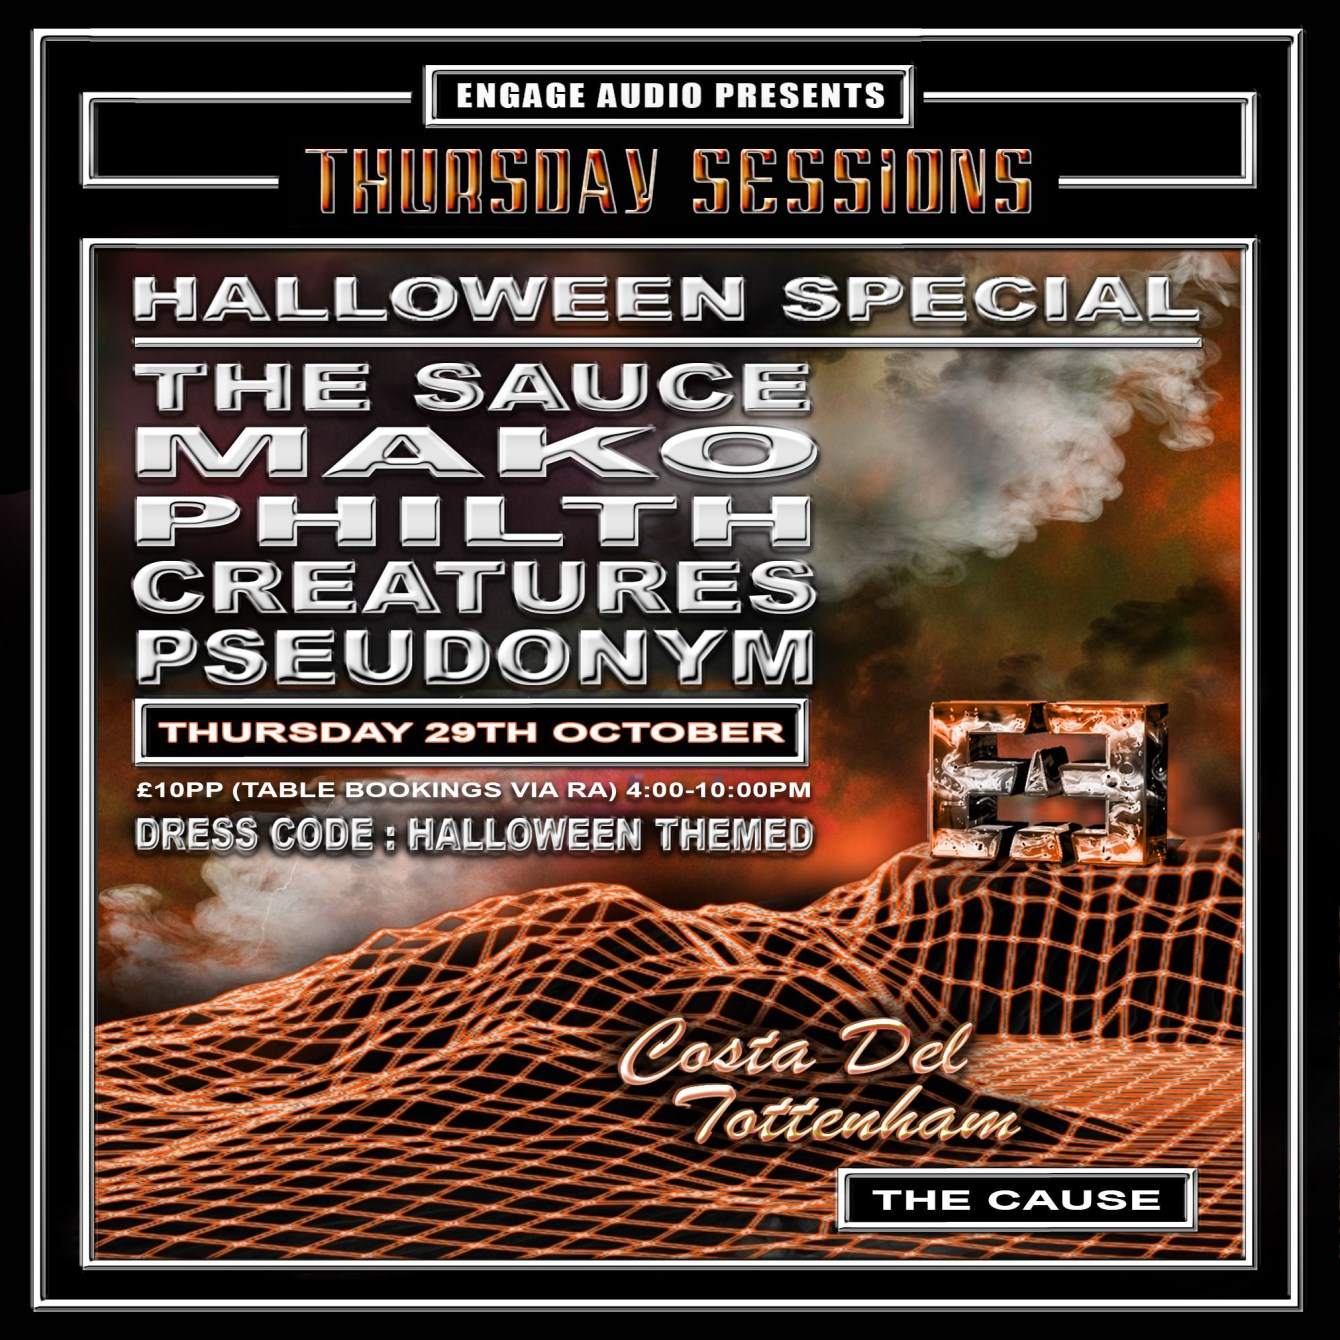 Engage Thursday Sessions Halloween Special with The Sauce, Mako, Philth, Creatures, Pseudonym - Página frontal